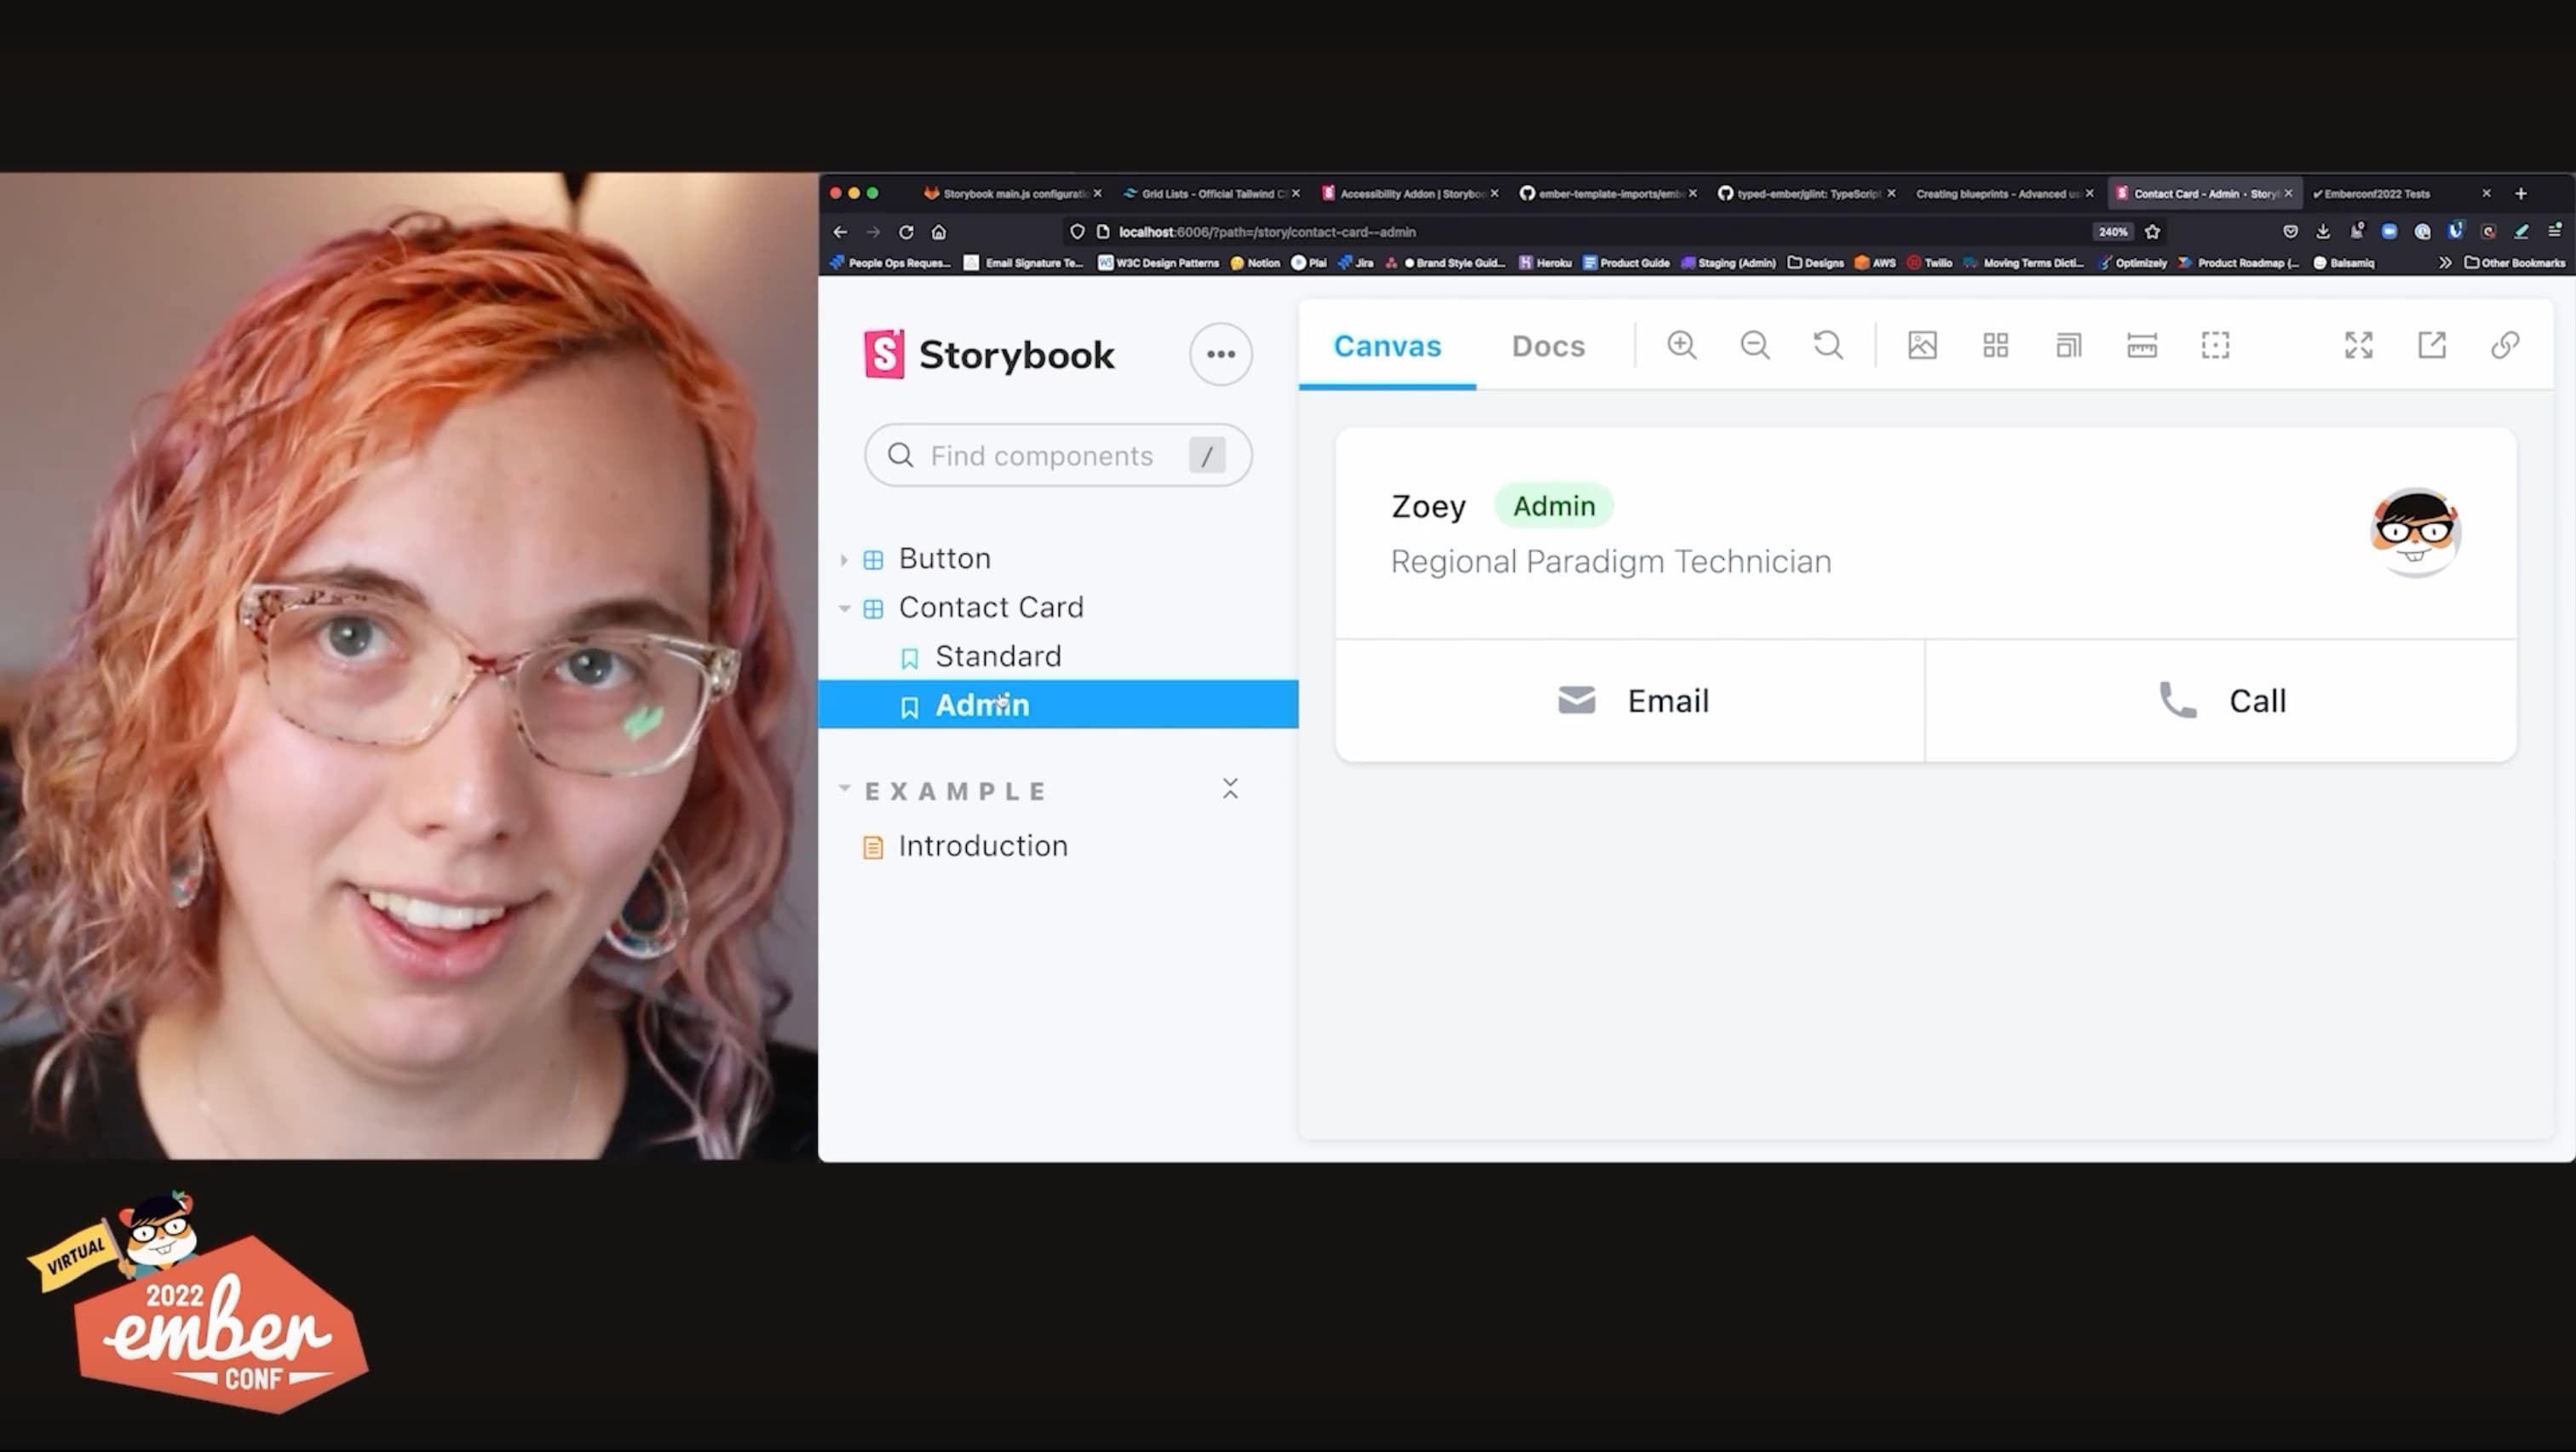 Still frame from a YouTube video of Ava presenting split-screen with a smile looking at the camera on the left and a web interface showing a web component built in Storybook on the right.